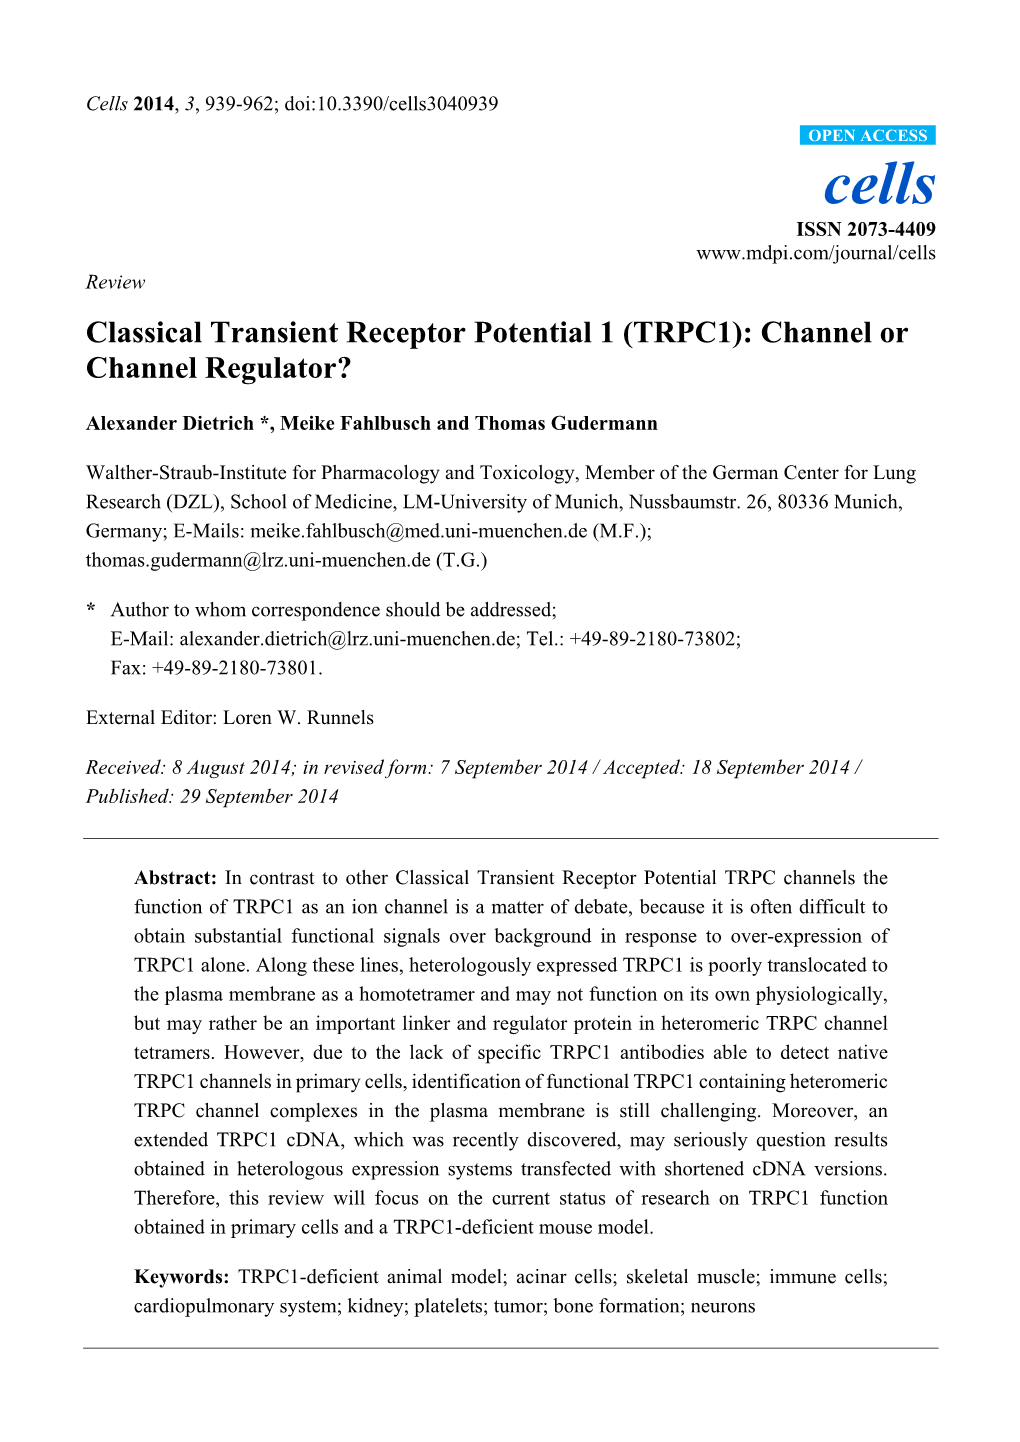 Classical Transient Receptor Potential 1 (TRPC1): Channel Or Channel Regulator?